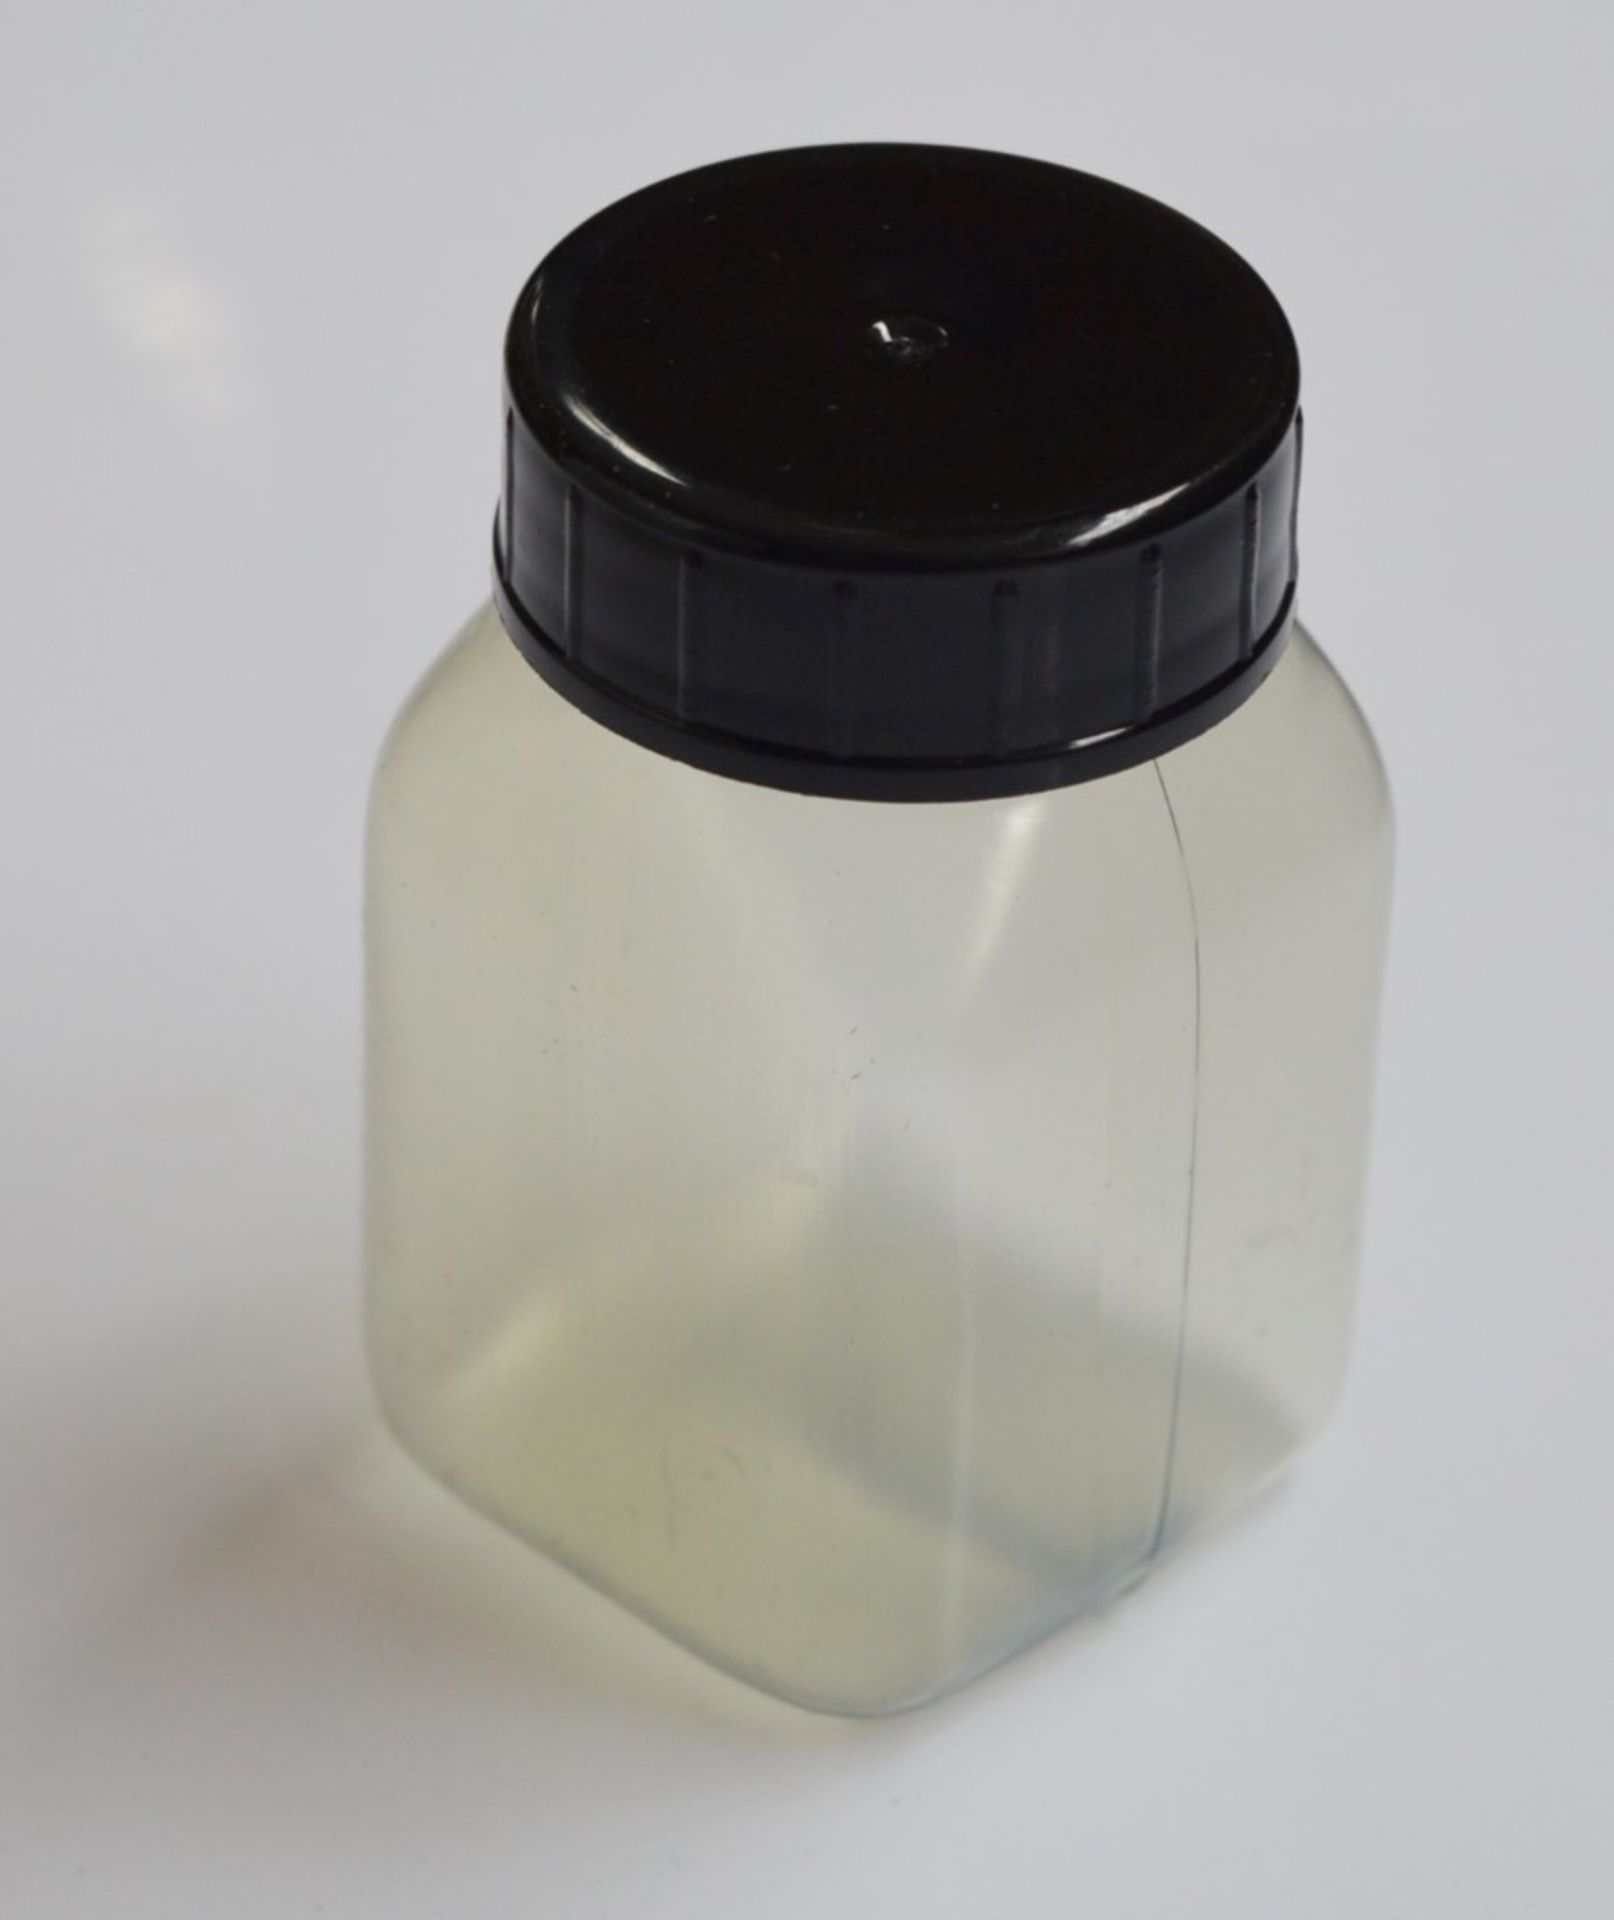 100 x Wide Neck Container Bottles With Leakproof Lids and PE Foam Inserts - 50ml Capacity - 38. - Image 4 of 6